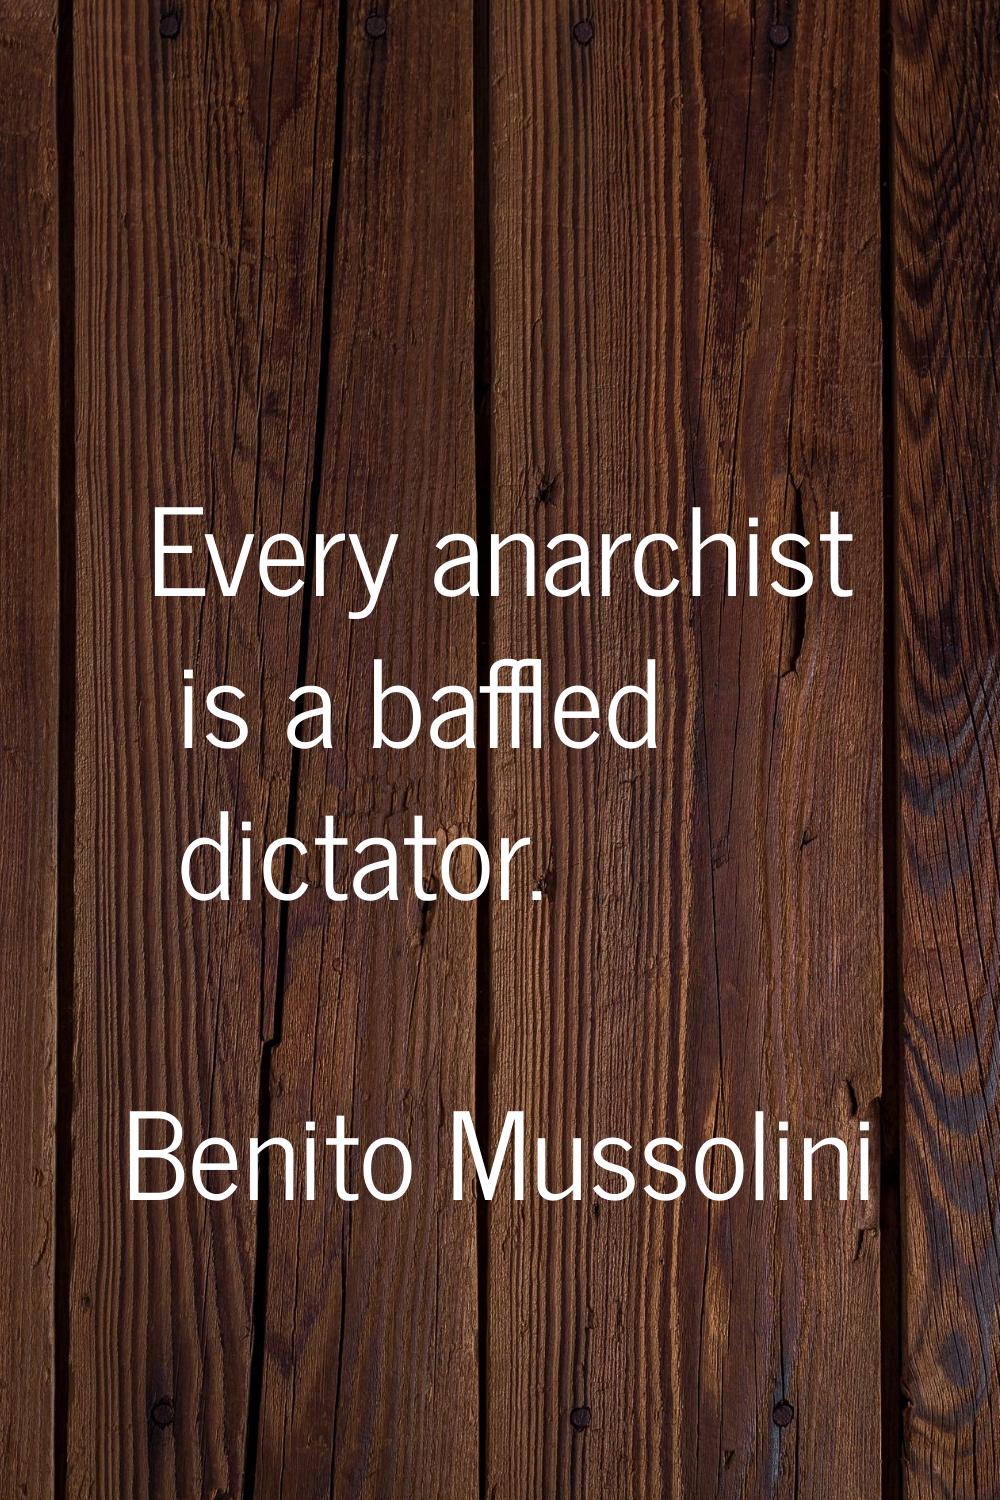 Every anarchist is a baffled dictator.